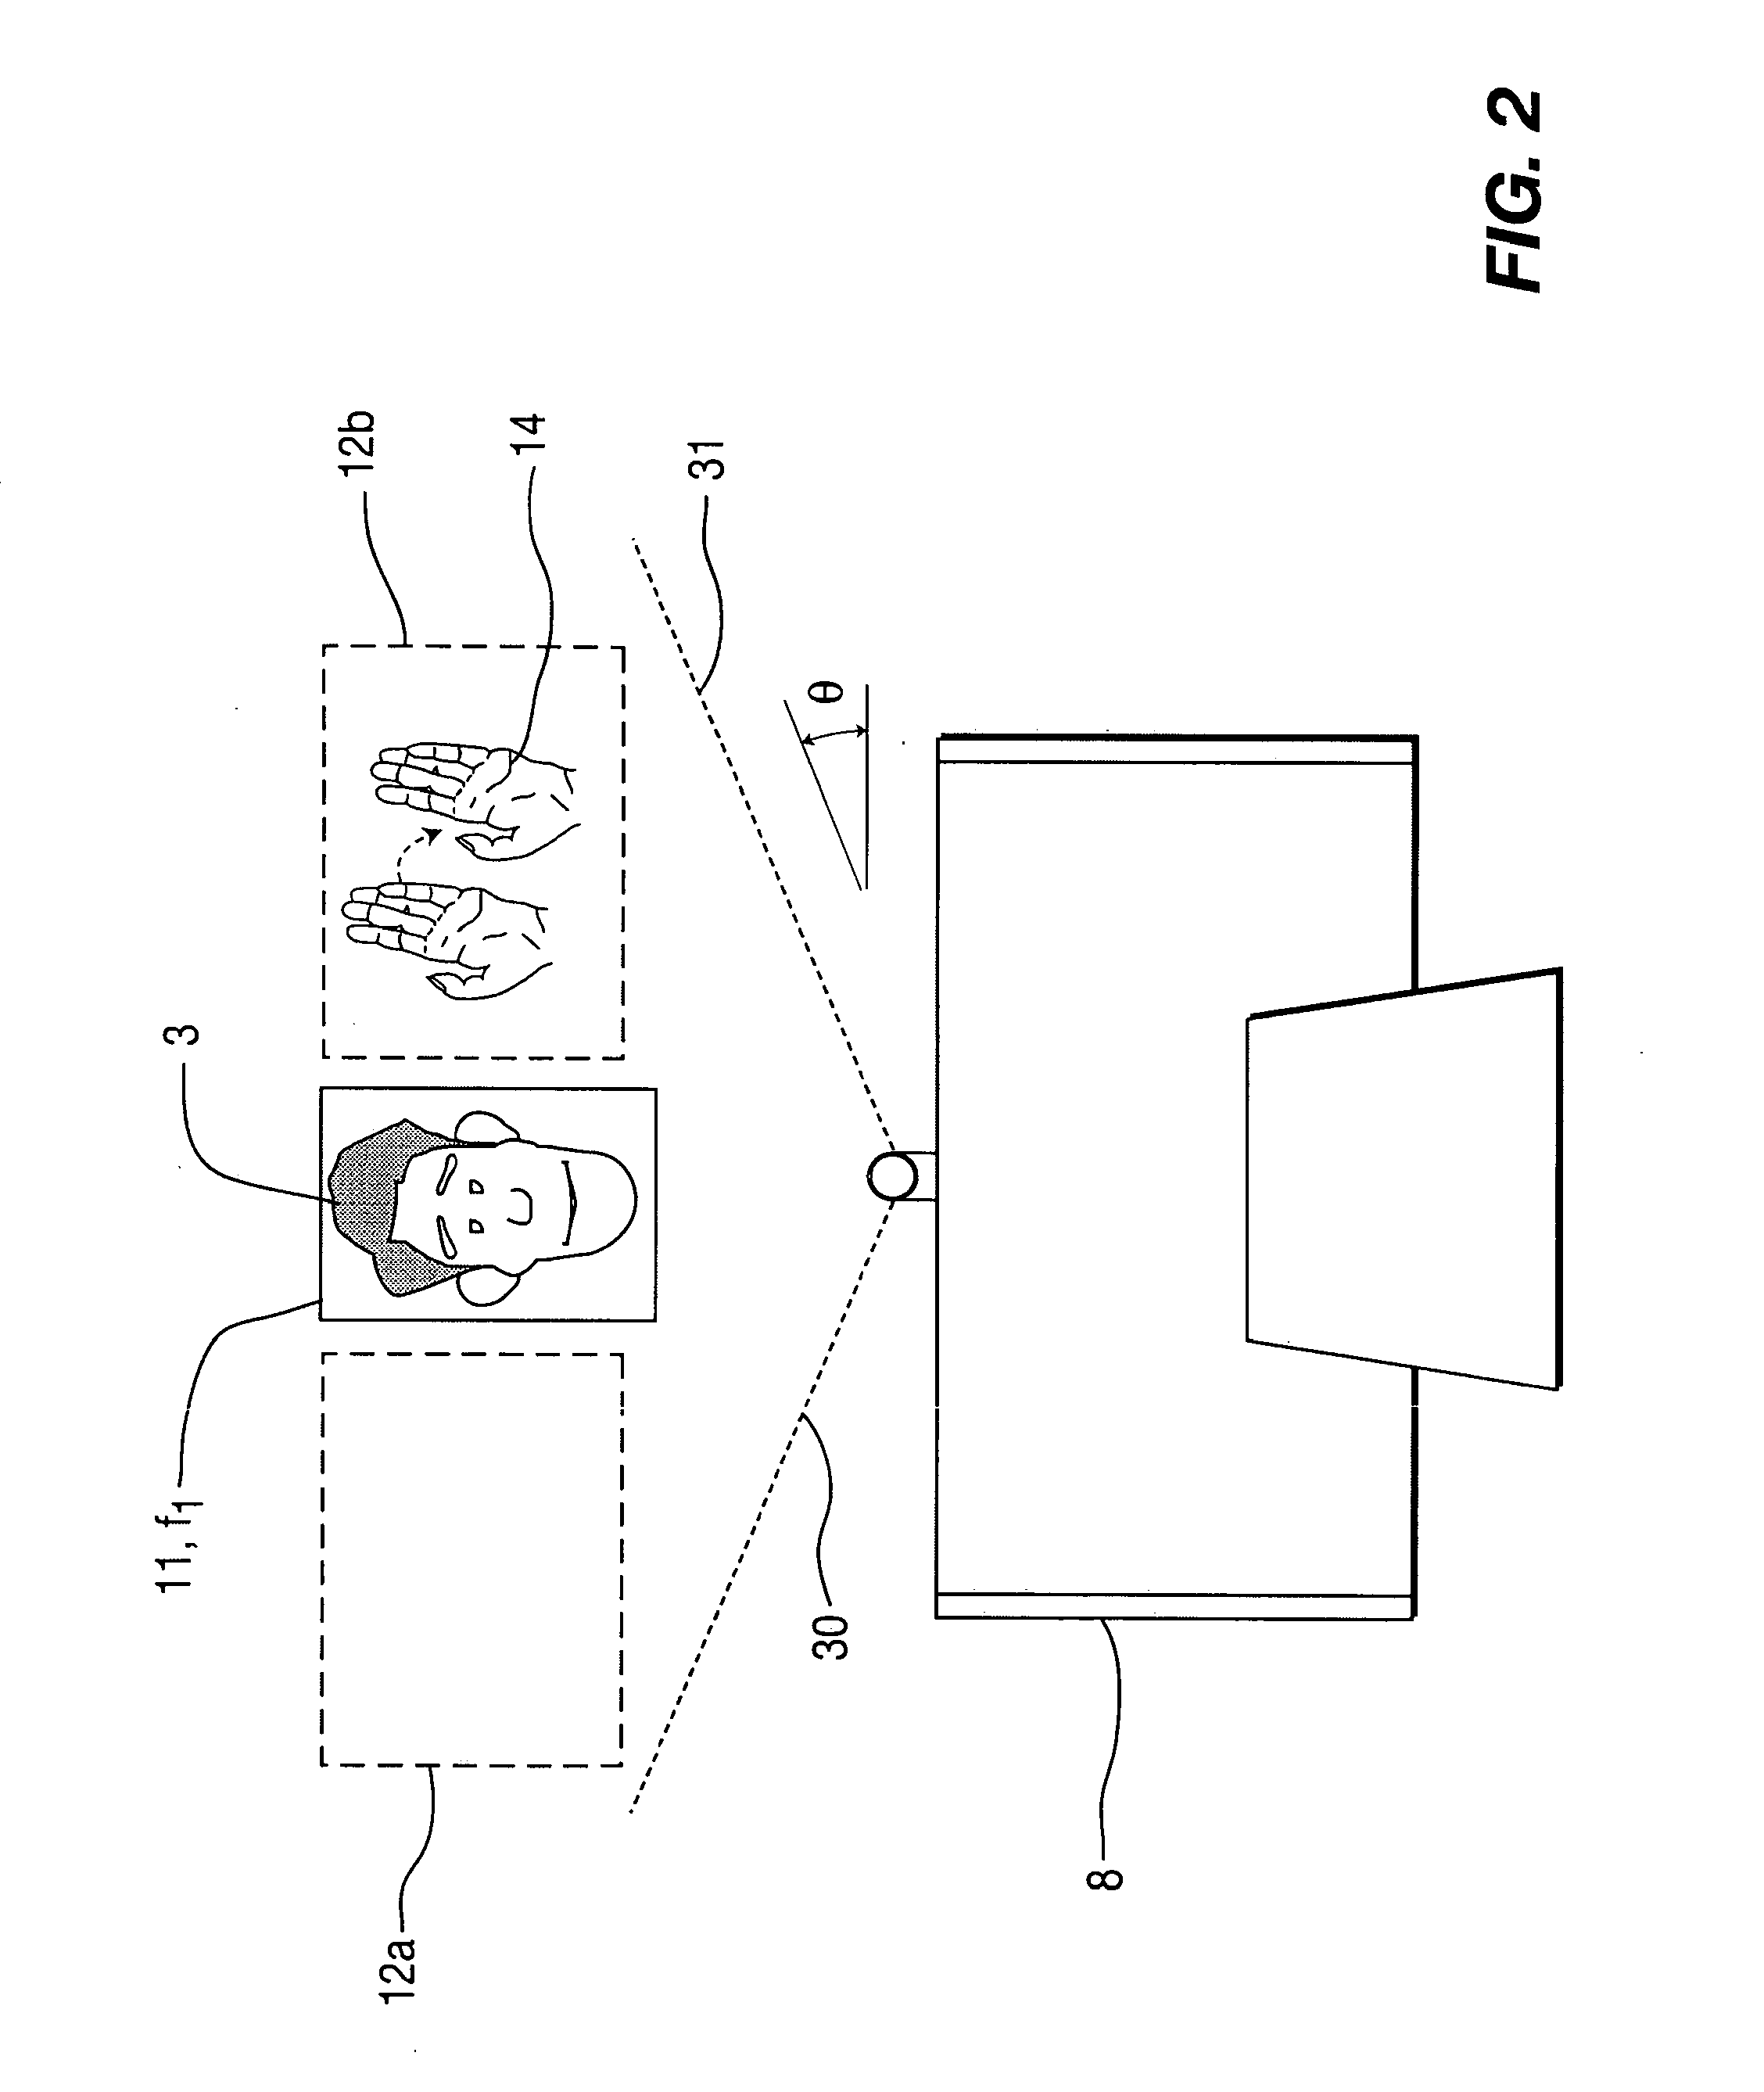 Method for controlling and requesting information from displaying multimedia